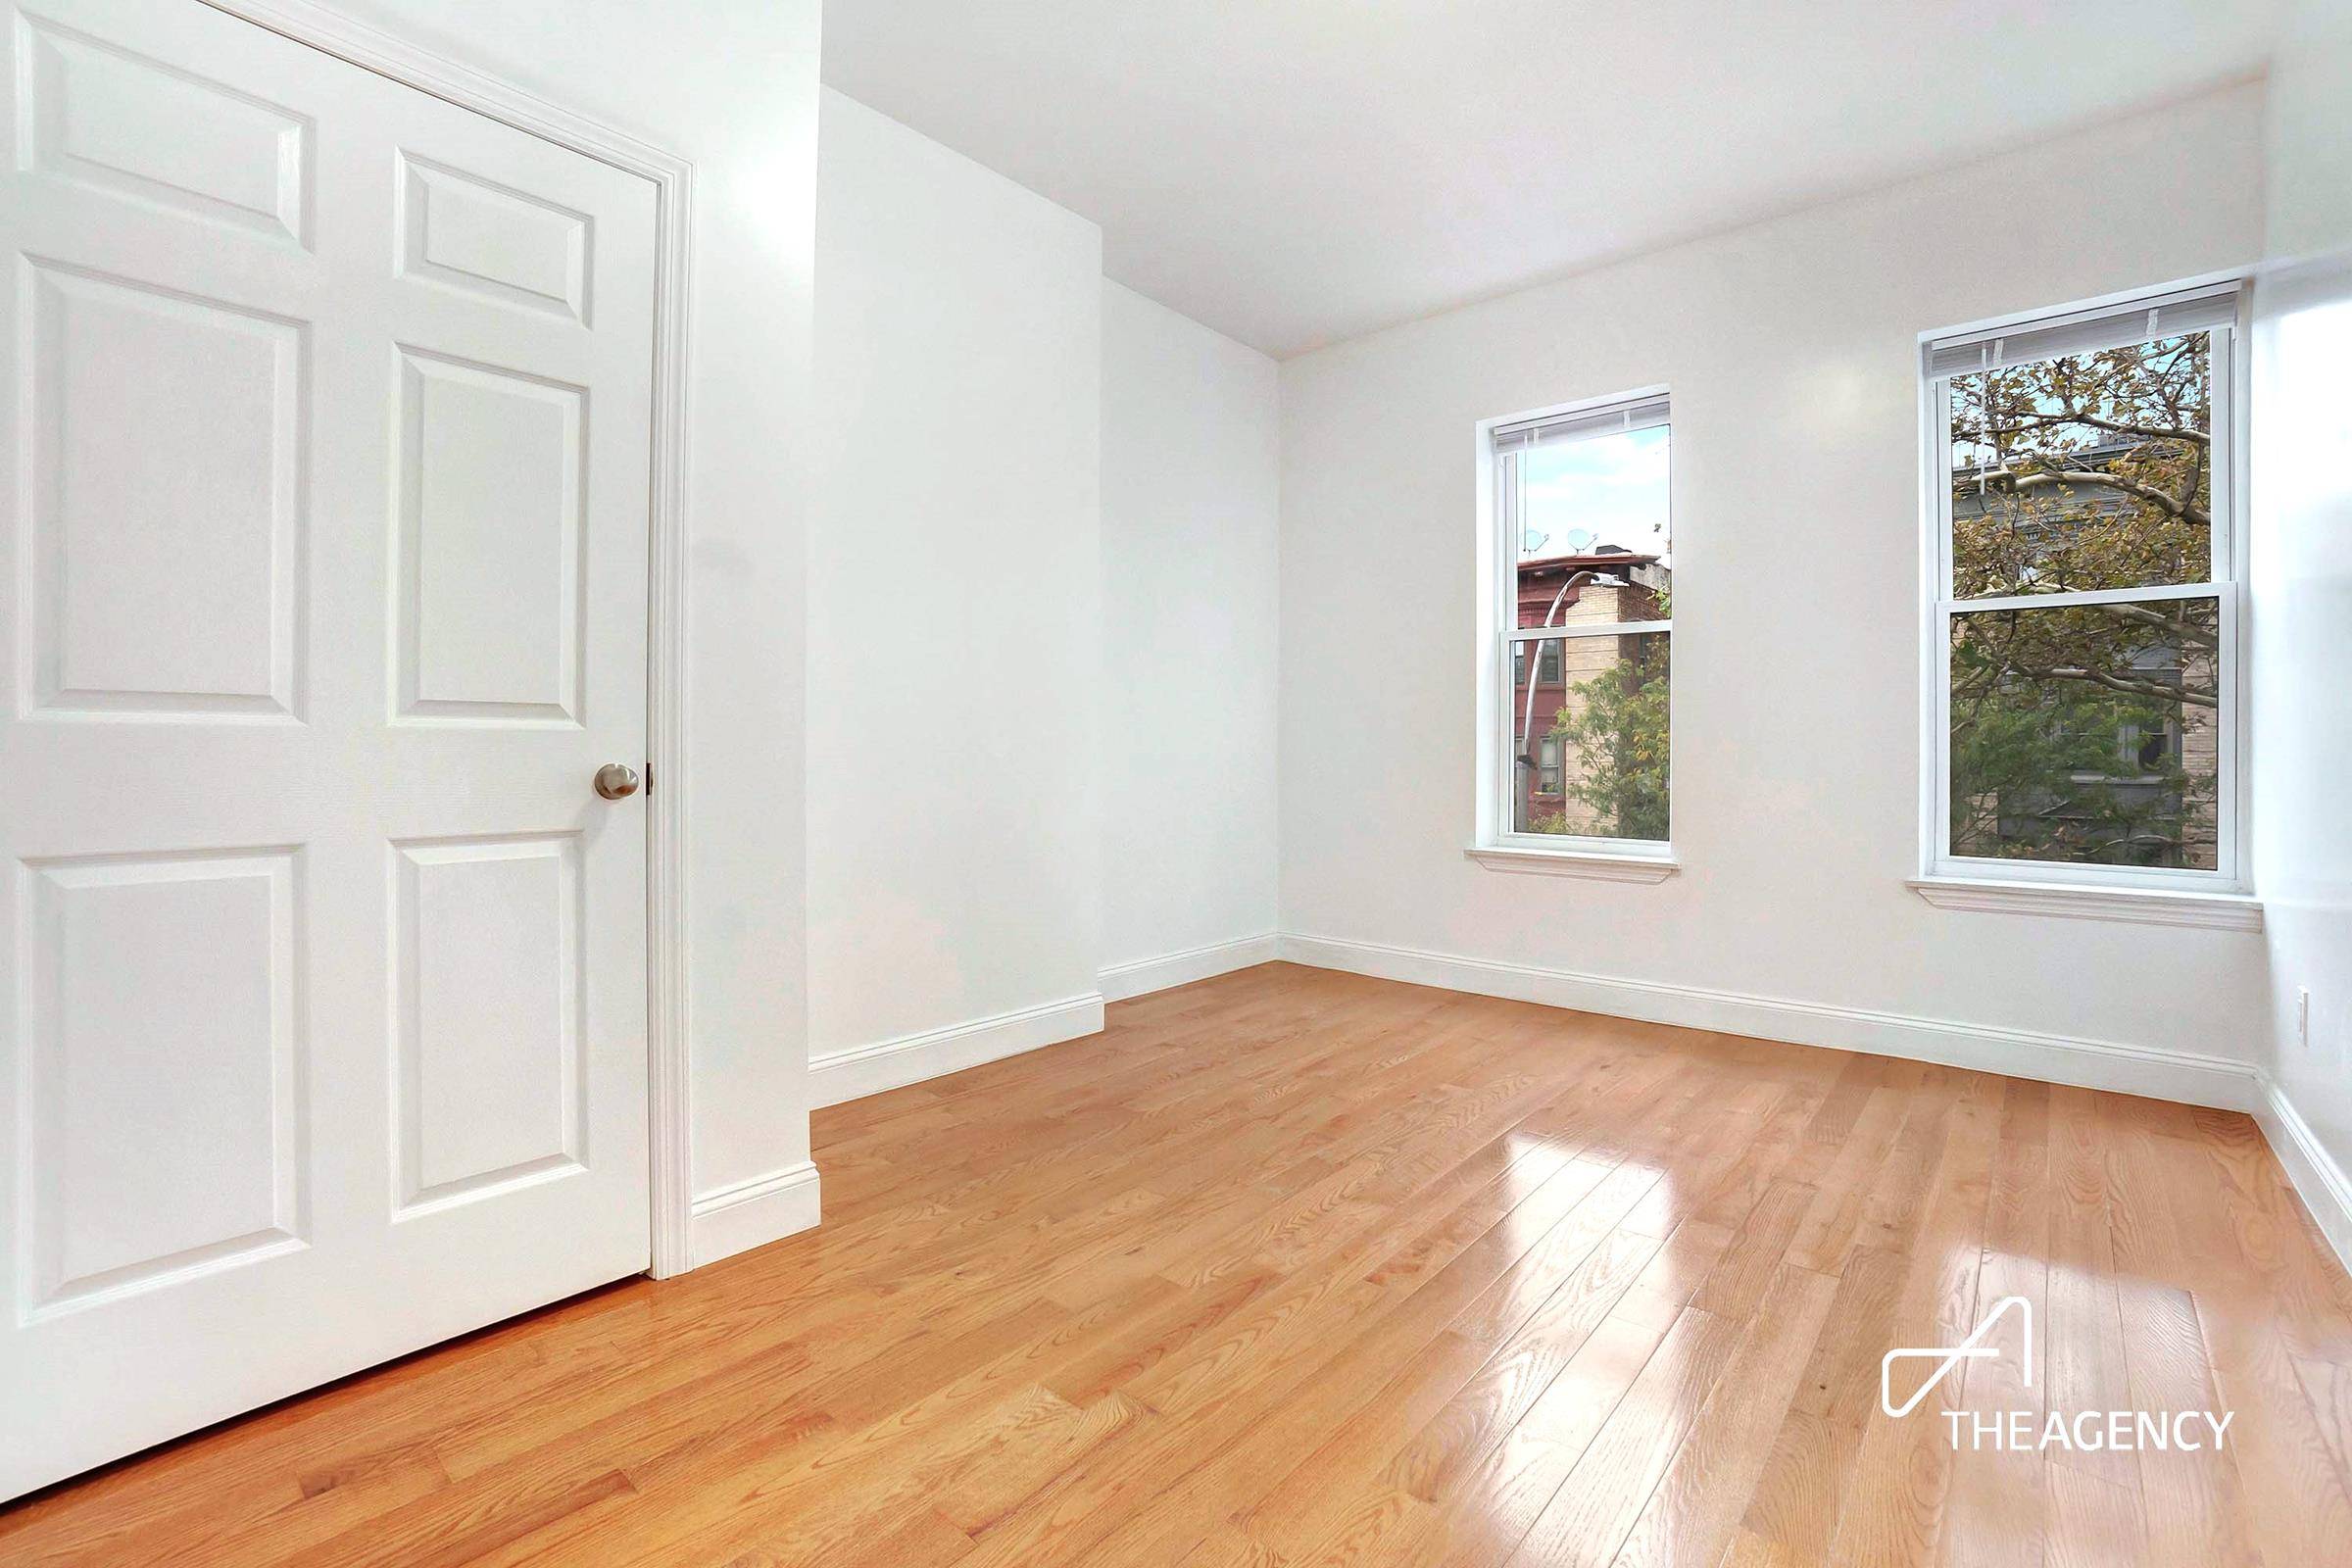 This incredible floor through 4 bedroom 2 bathroom home is brand new renovated, spanning 1000sqft, and is minutes to the C train and various bus stops.